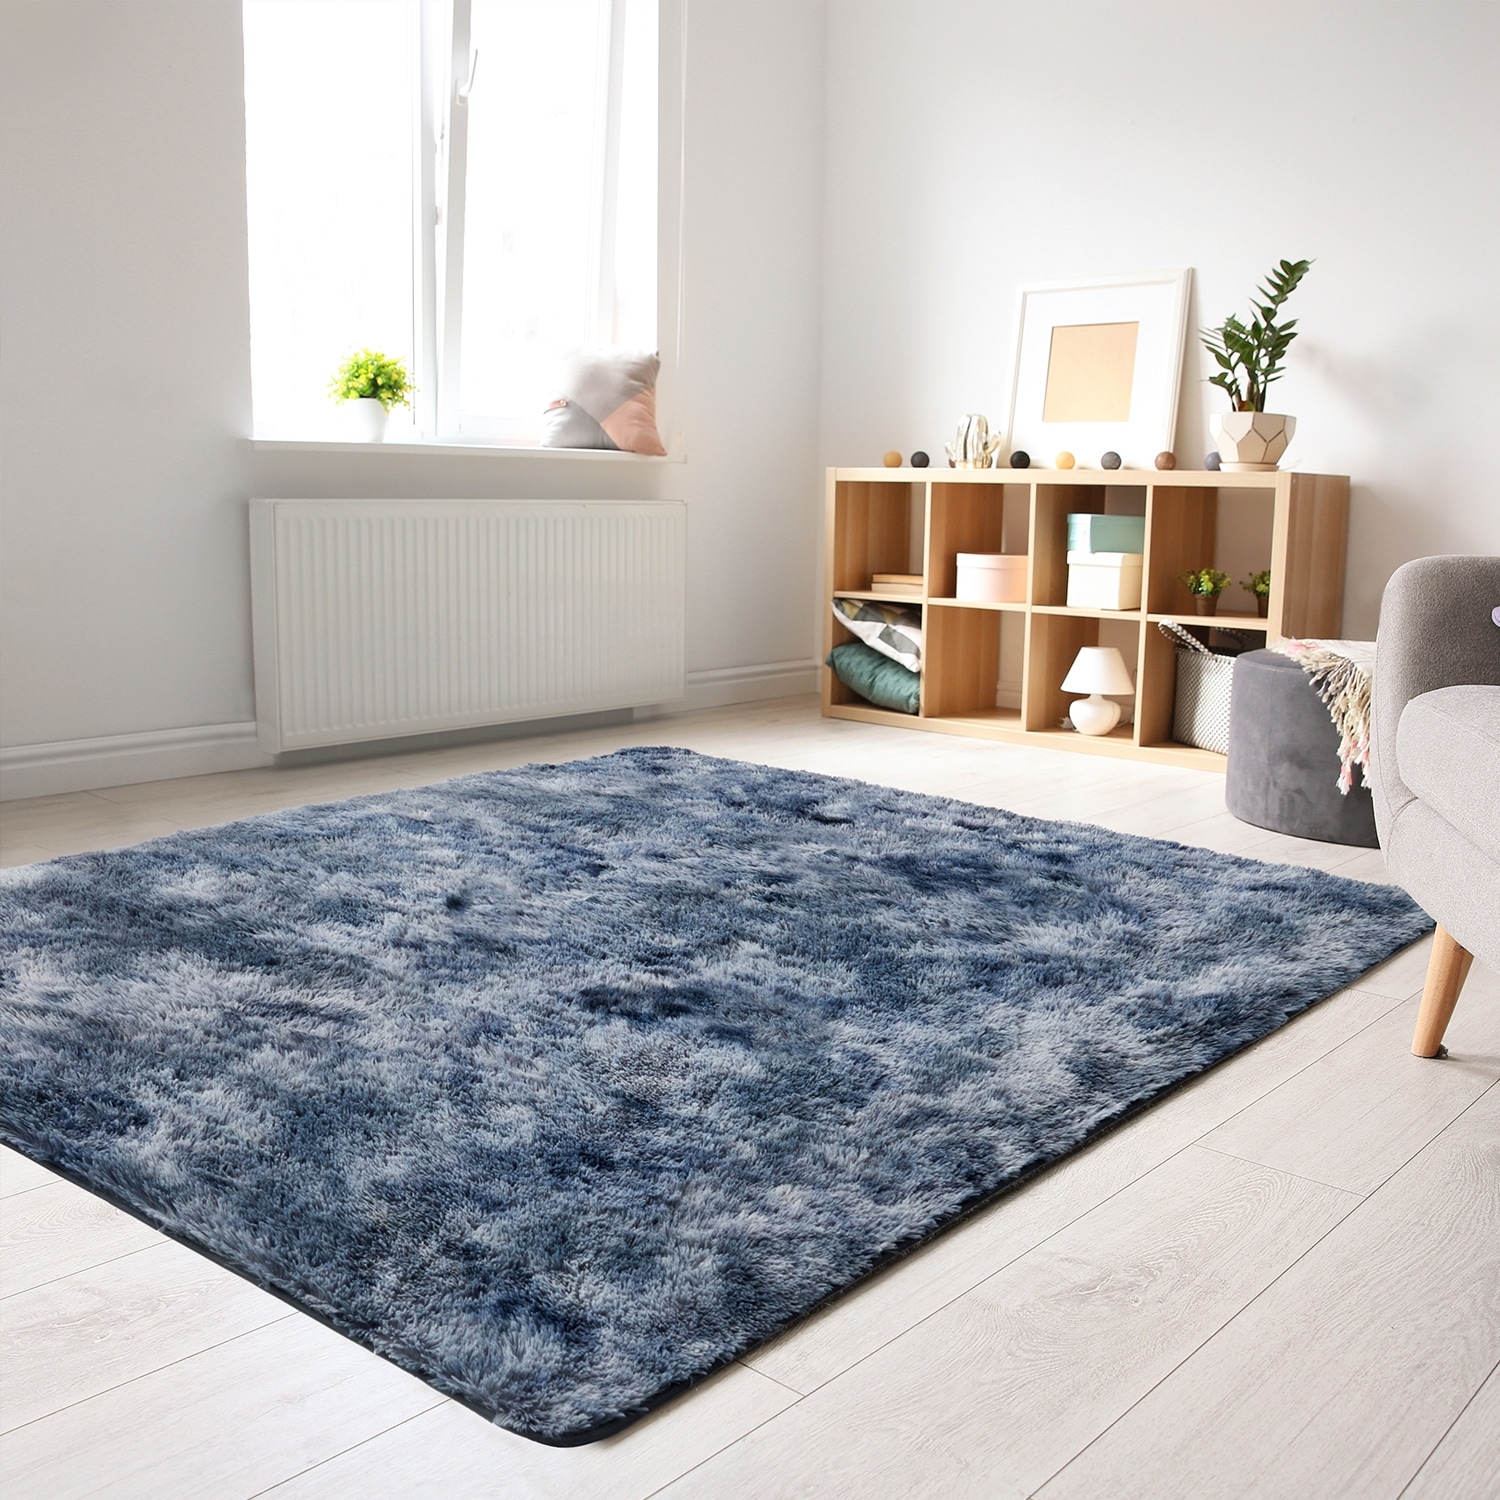 5ft Fluffy Area Rugs Tie-dye Shaggy Soft Home Carpet Winter Warm